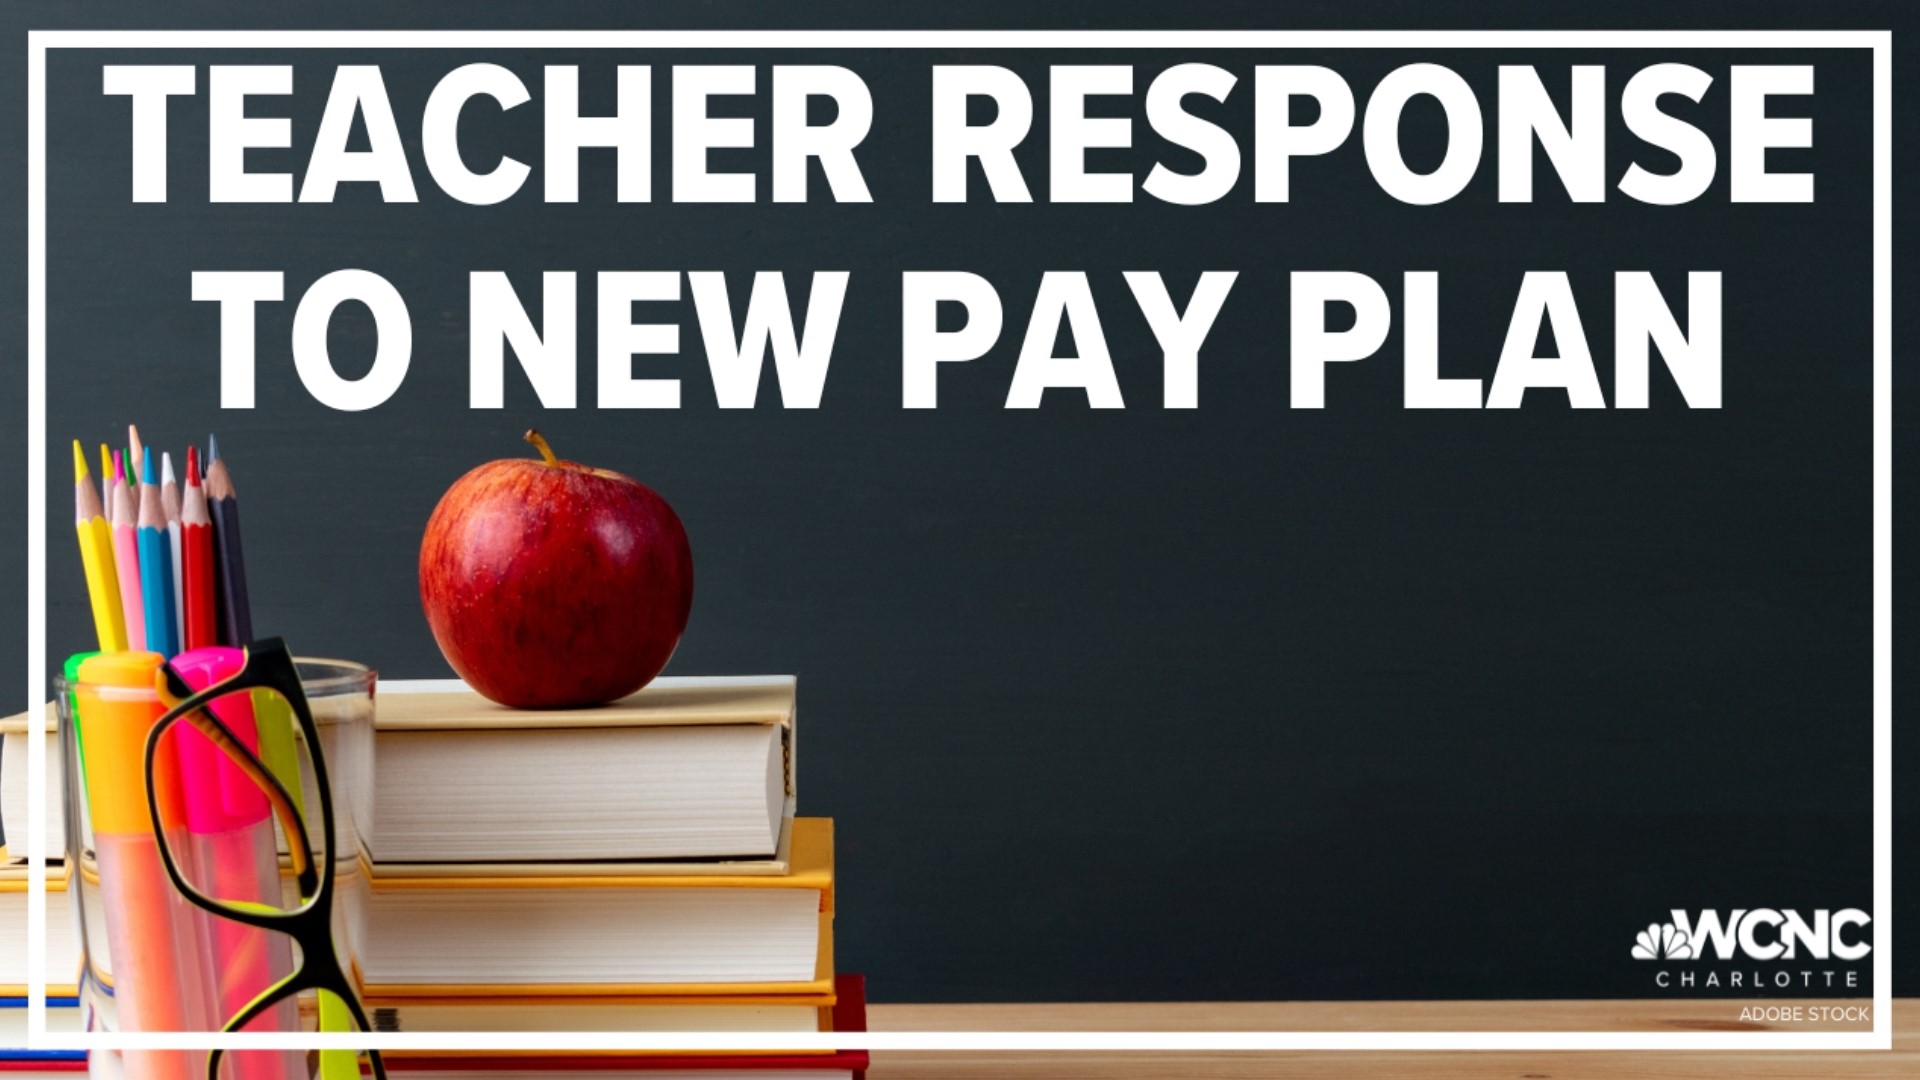 The plan would make educators subject to evaluations in order to get a raise.